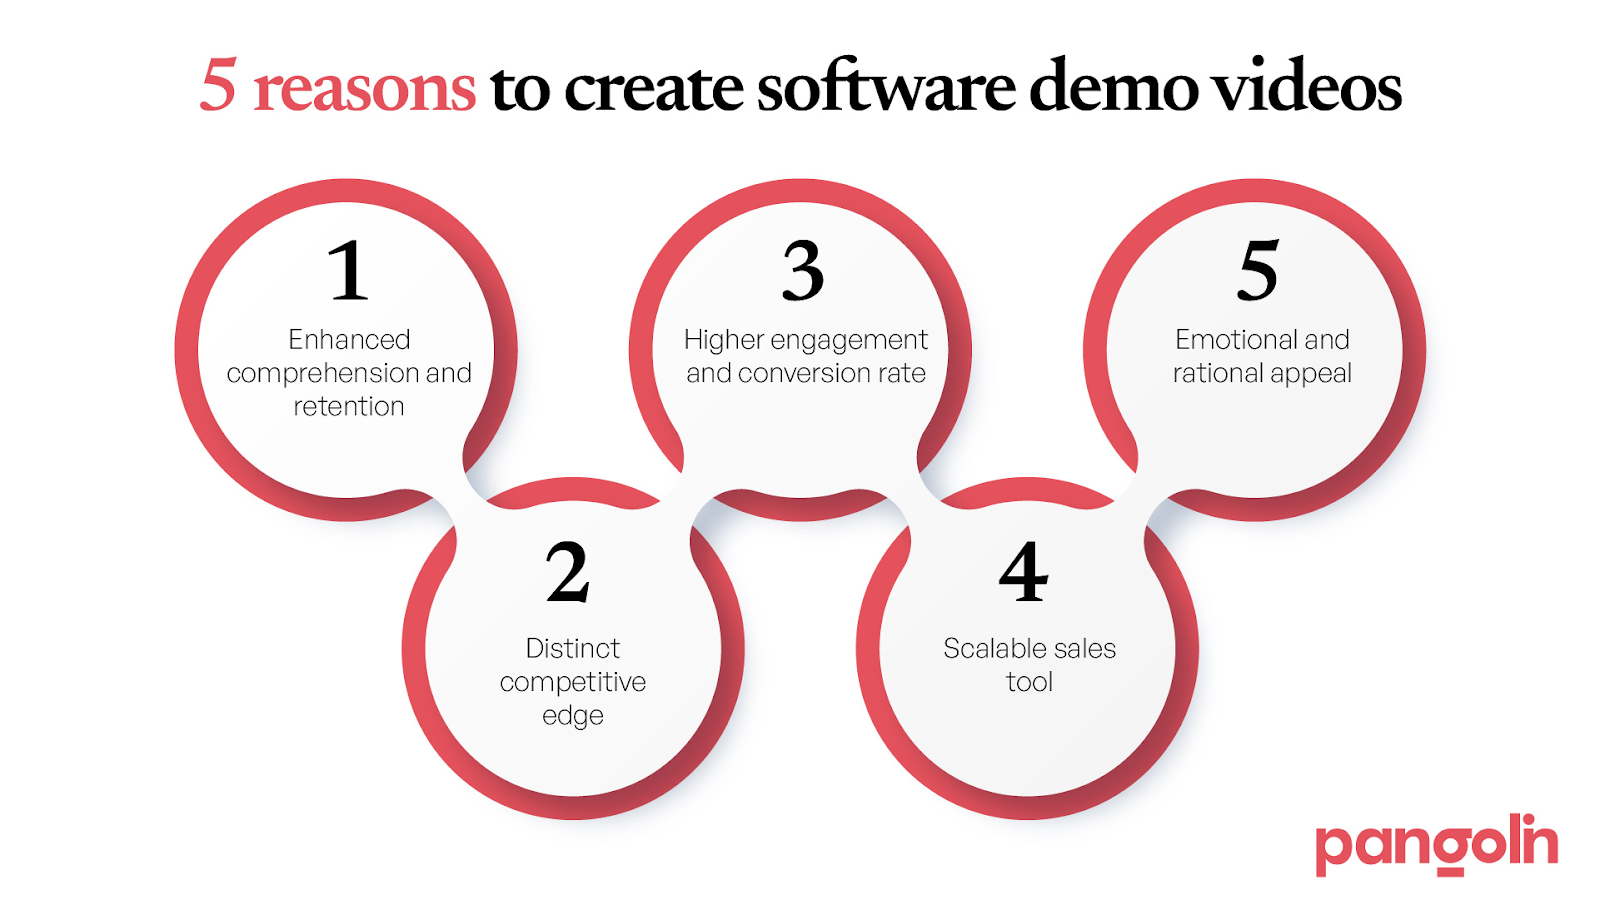 5 Key Reasons to Embrace Software Demo Videos 